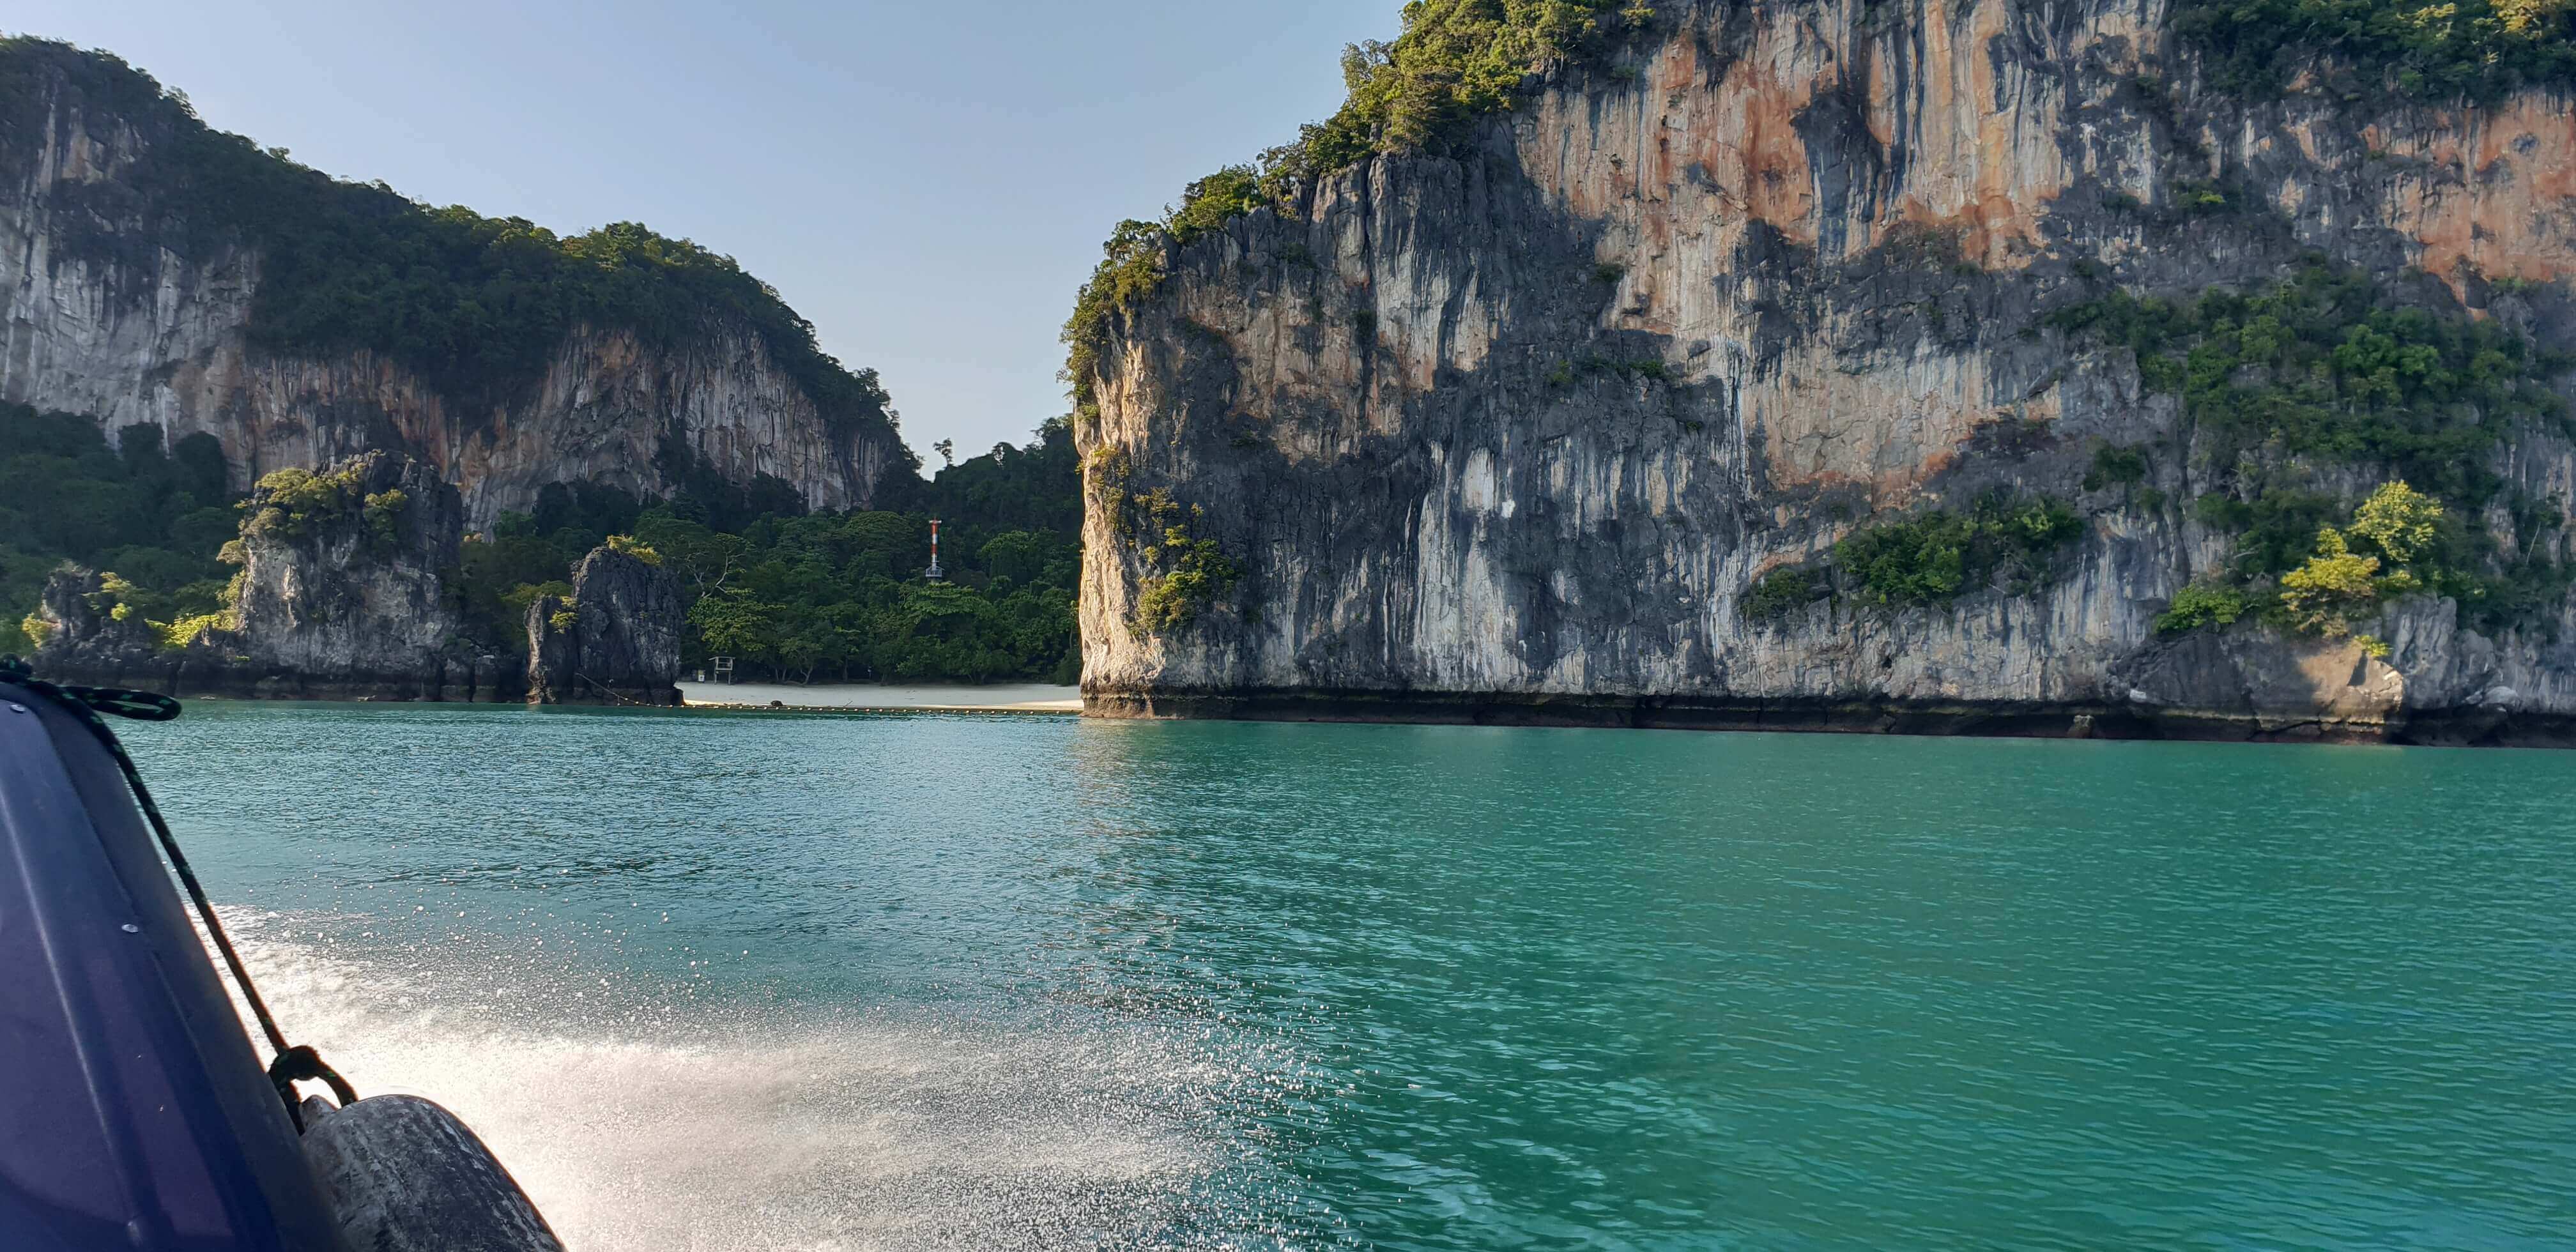 The day trip from Krabi to James Bond island and Hong island is a must do for every traveller